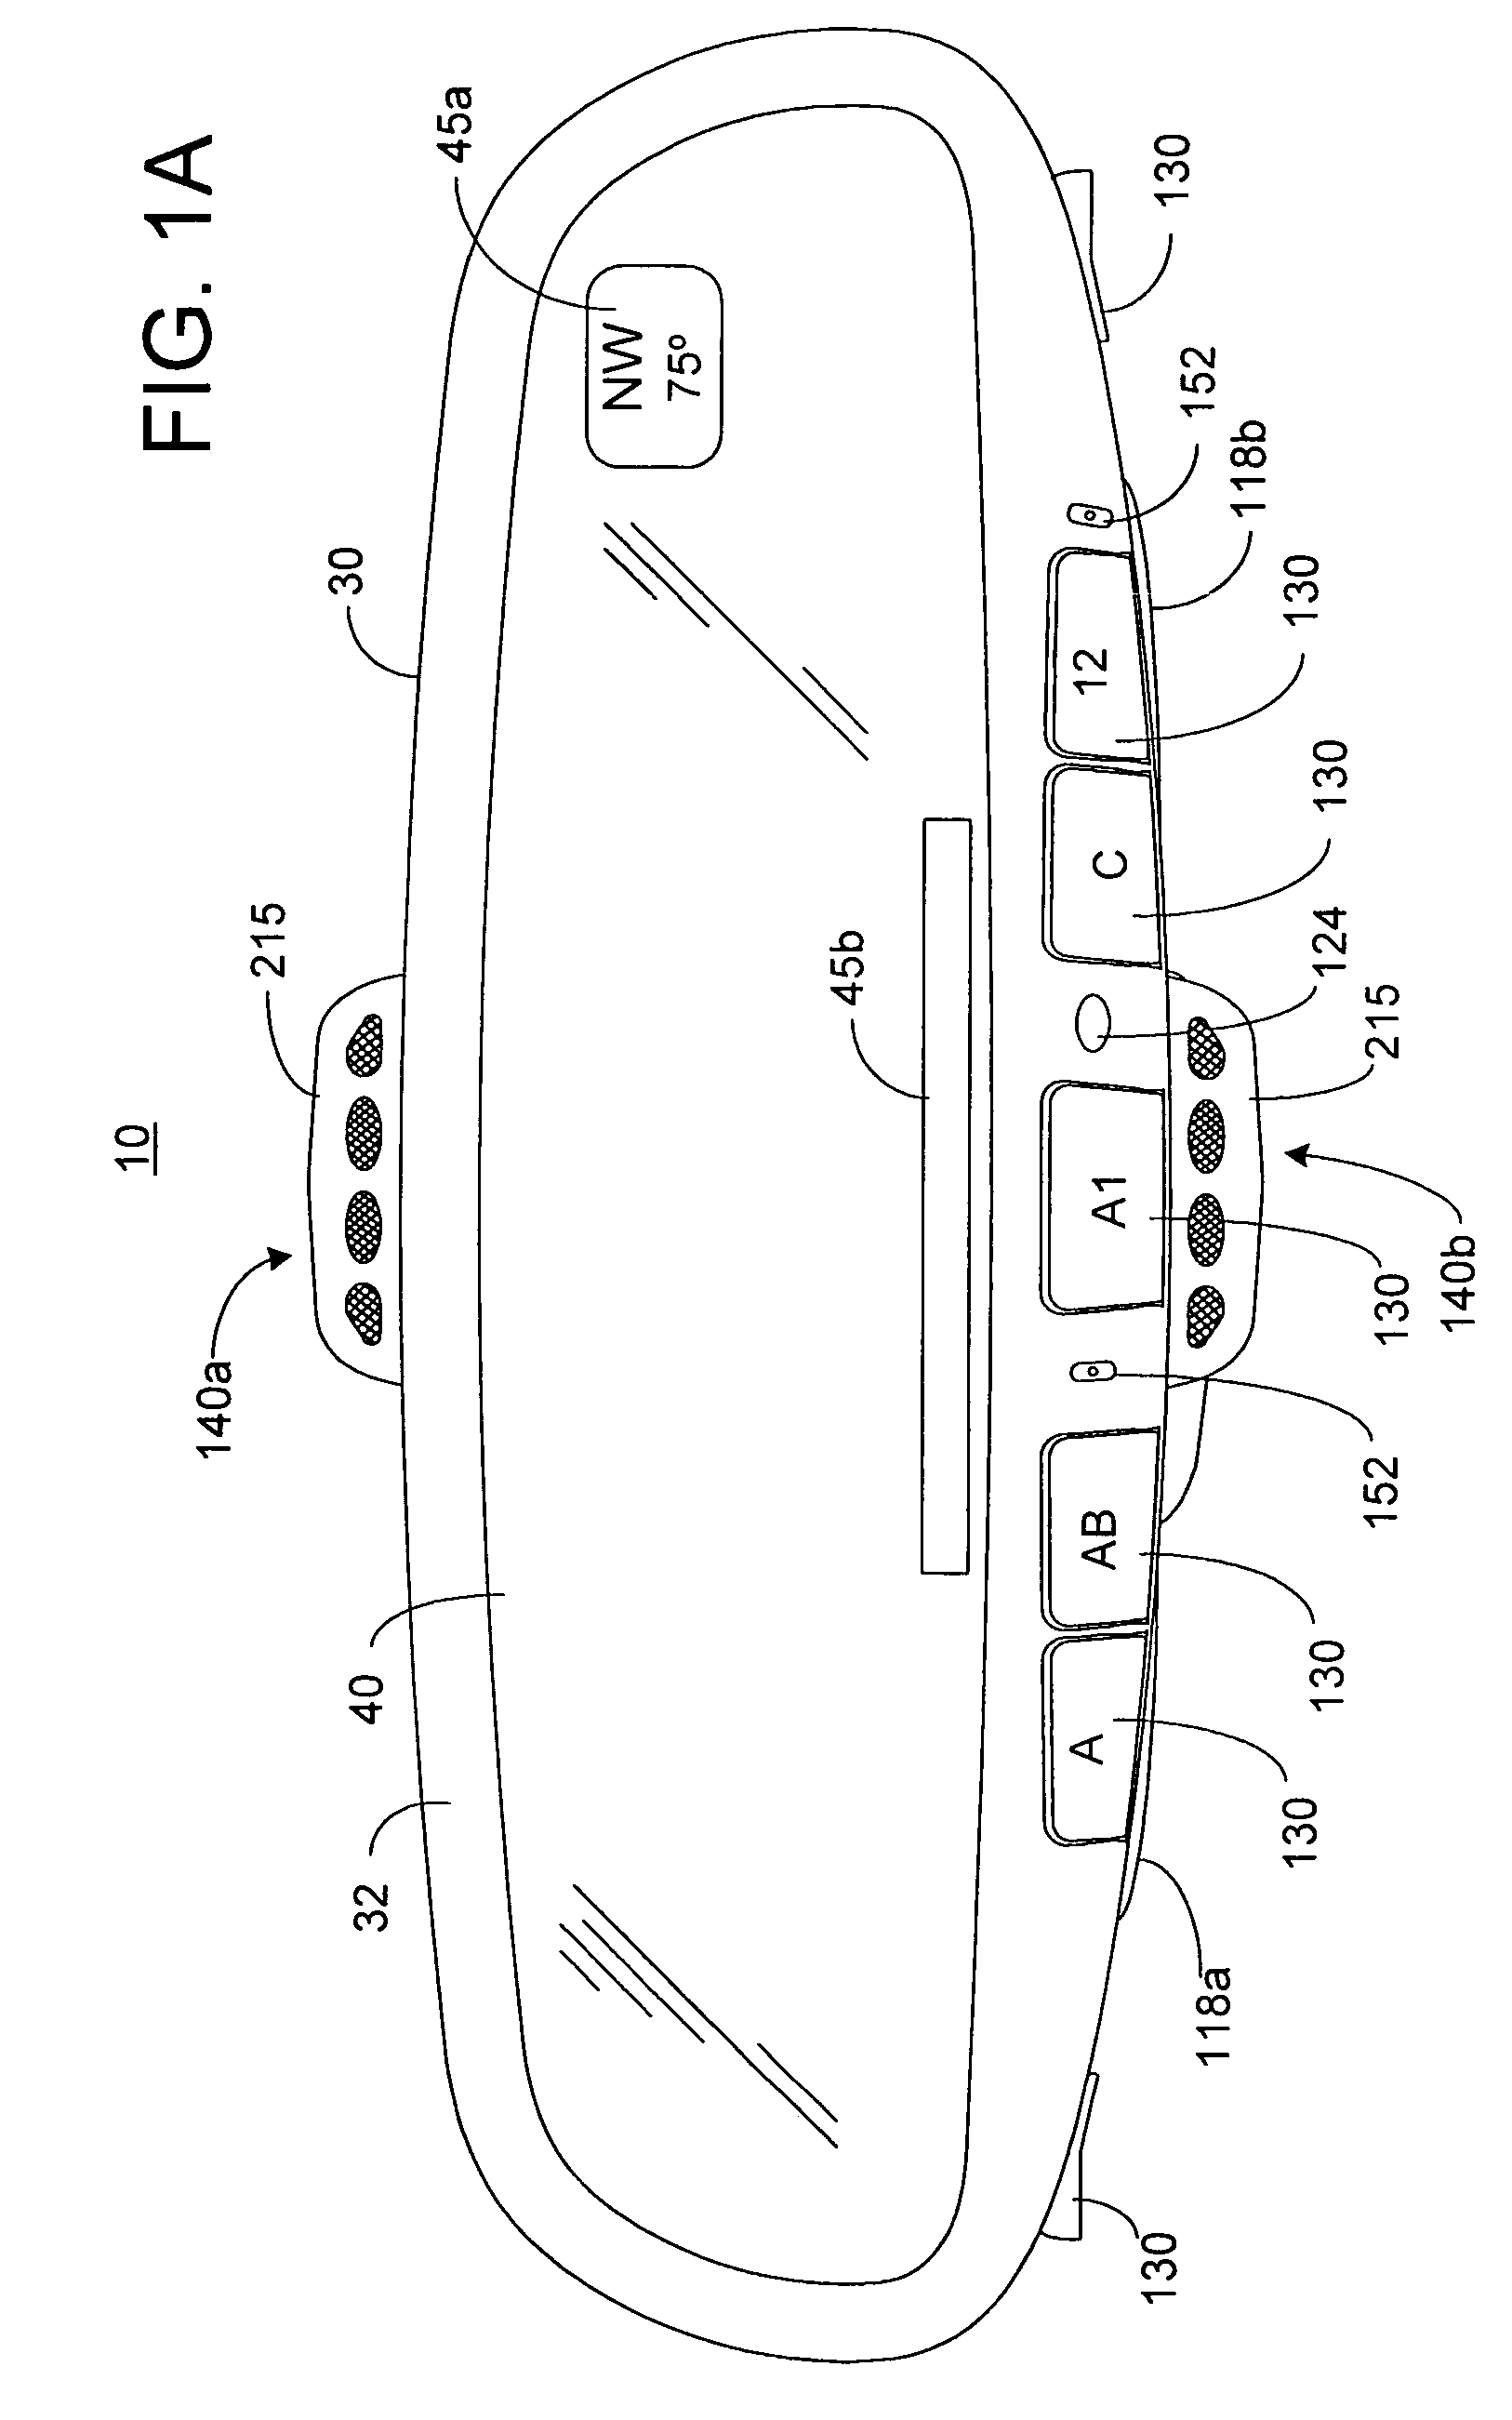 Rearview mirror assemblies incorporating hands-free telephone components